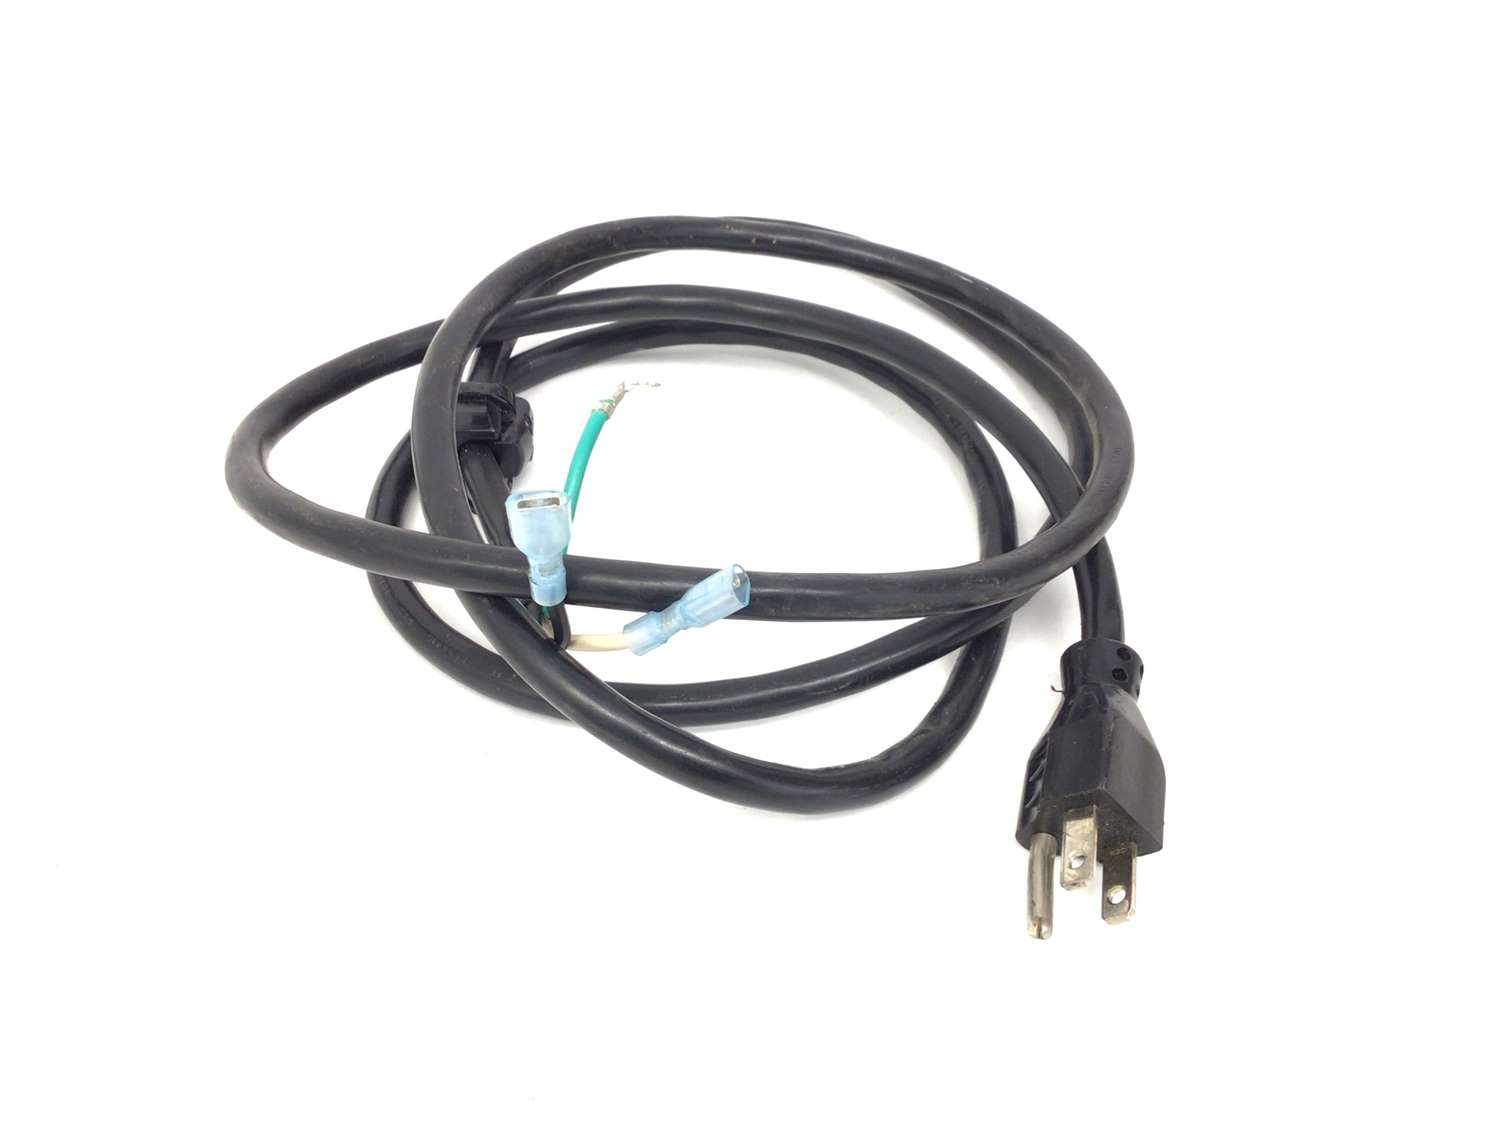 Power Cord Hardwired (Used)